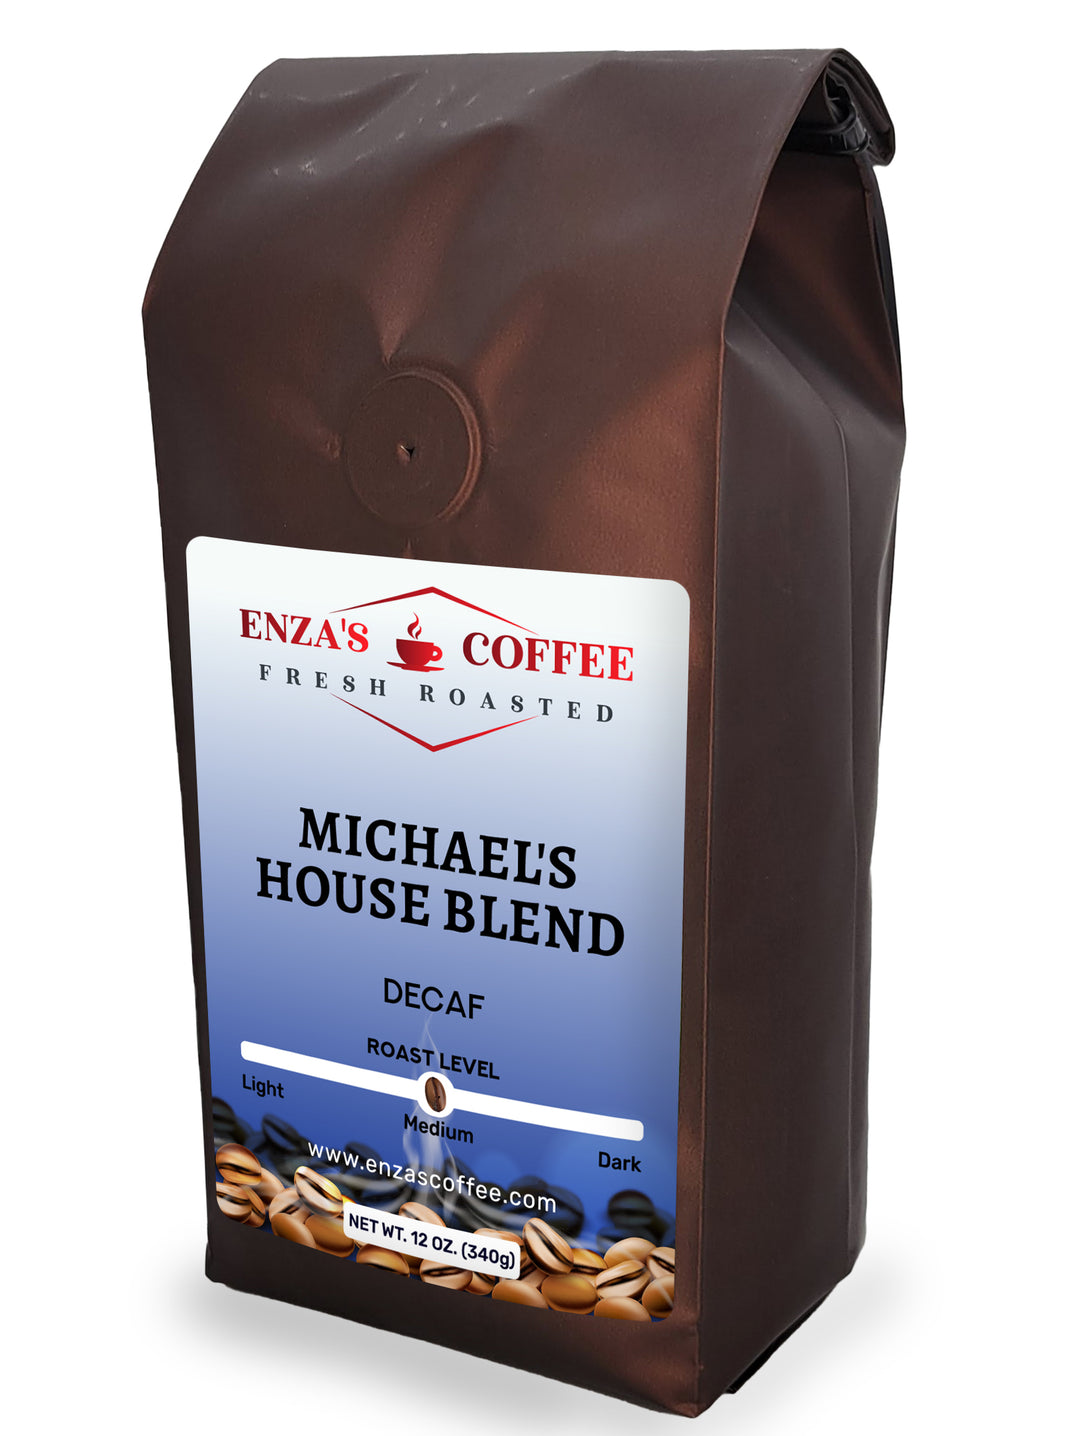 Michael's House Blend Decaf